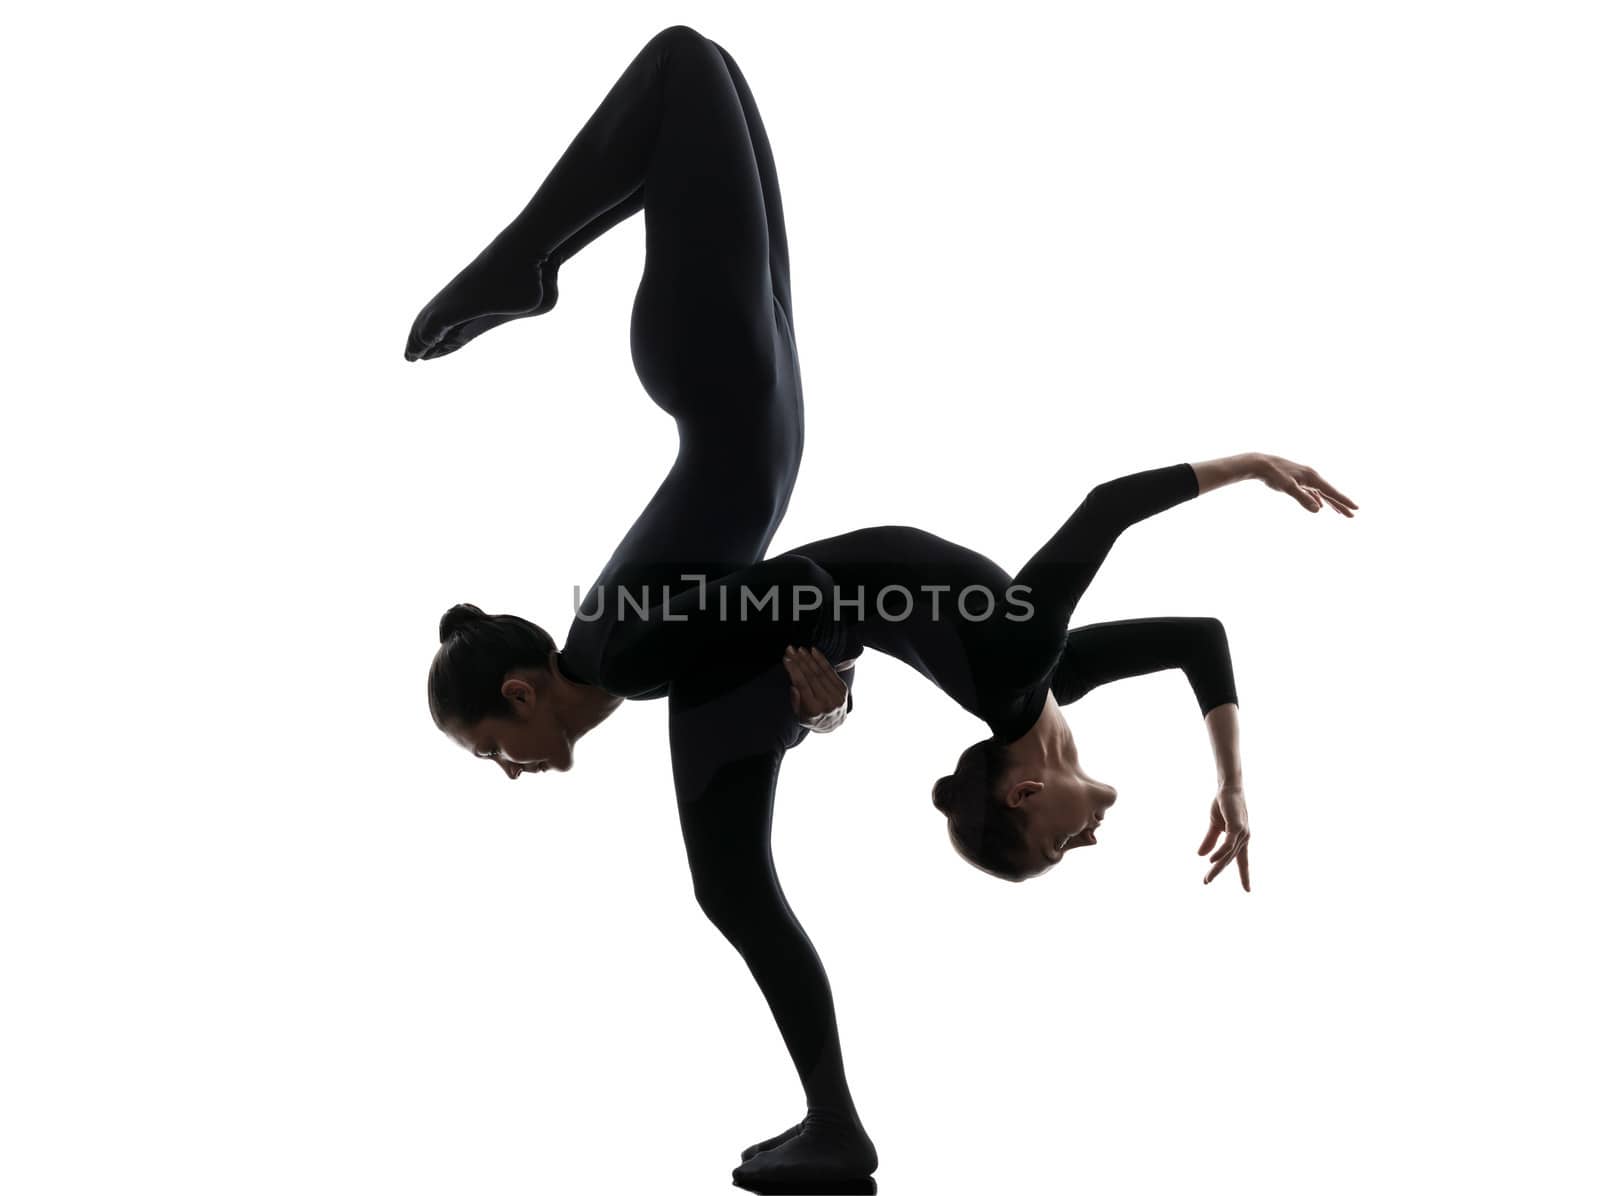 two women contortionist practicing gymnastic yoga in silhouette  on white background